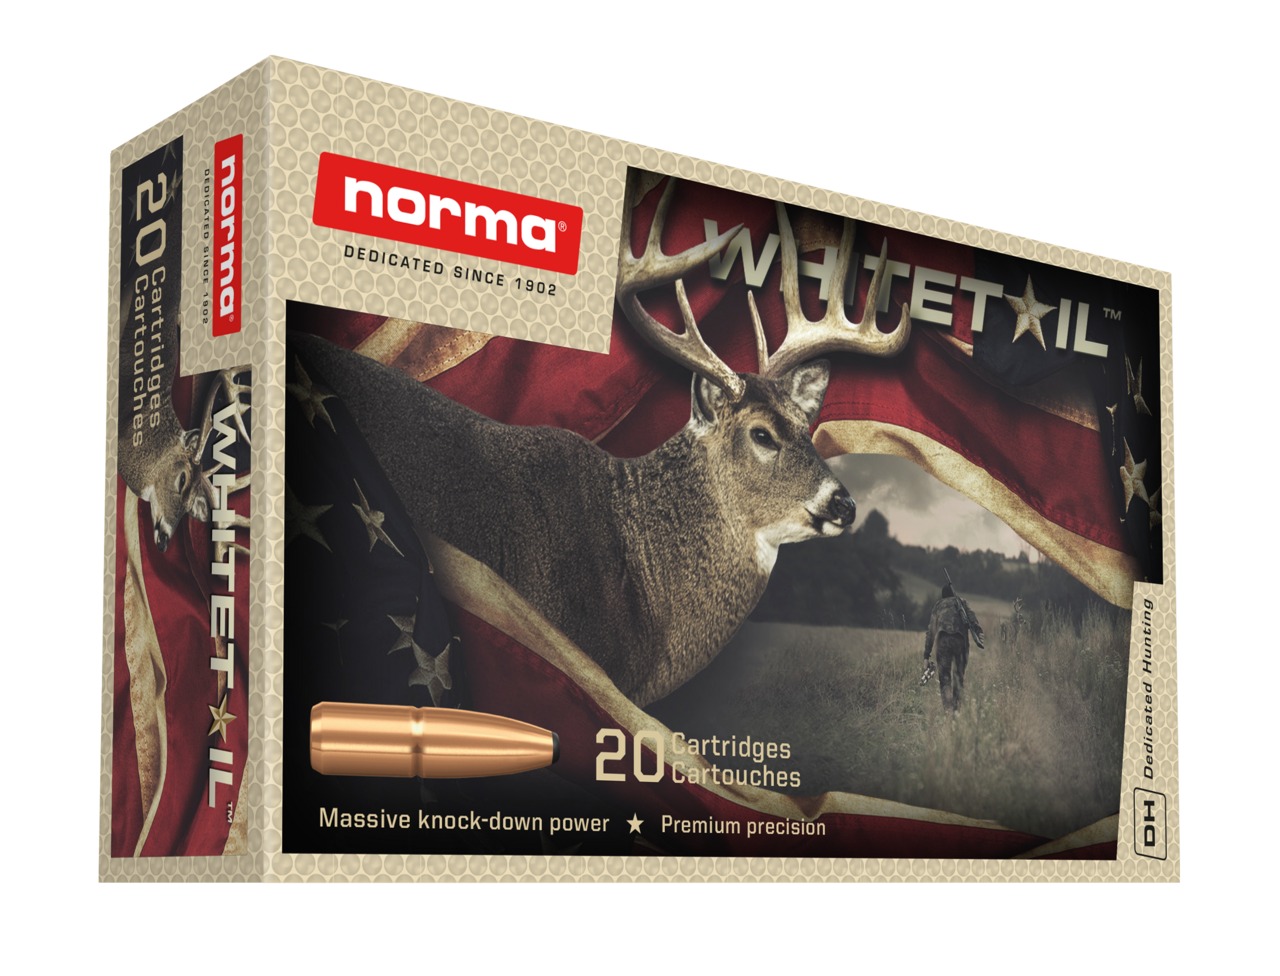 CART NORMA 6.5X55 10.1G/156GR WHITETAIL BTE 20 ref 20166622 NORMA